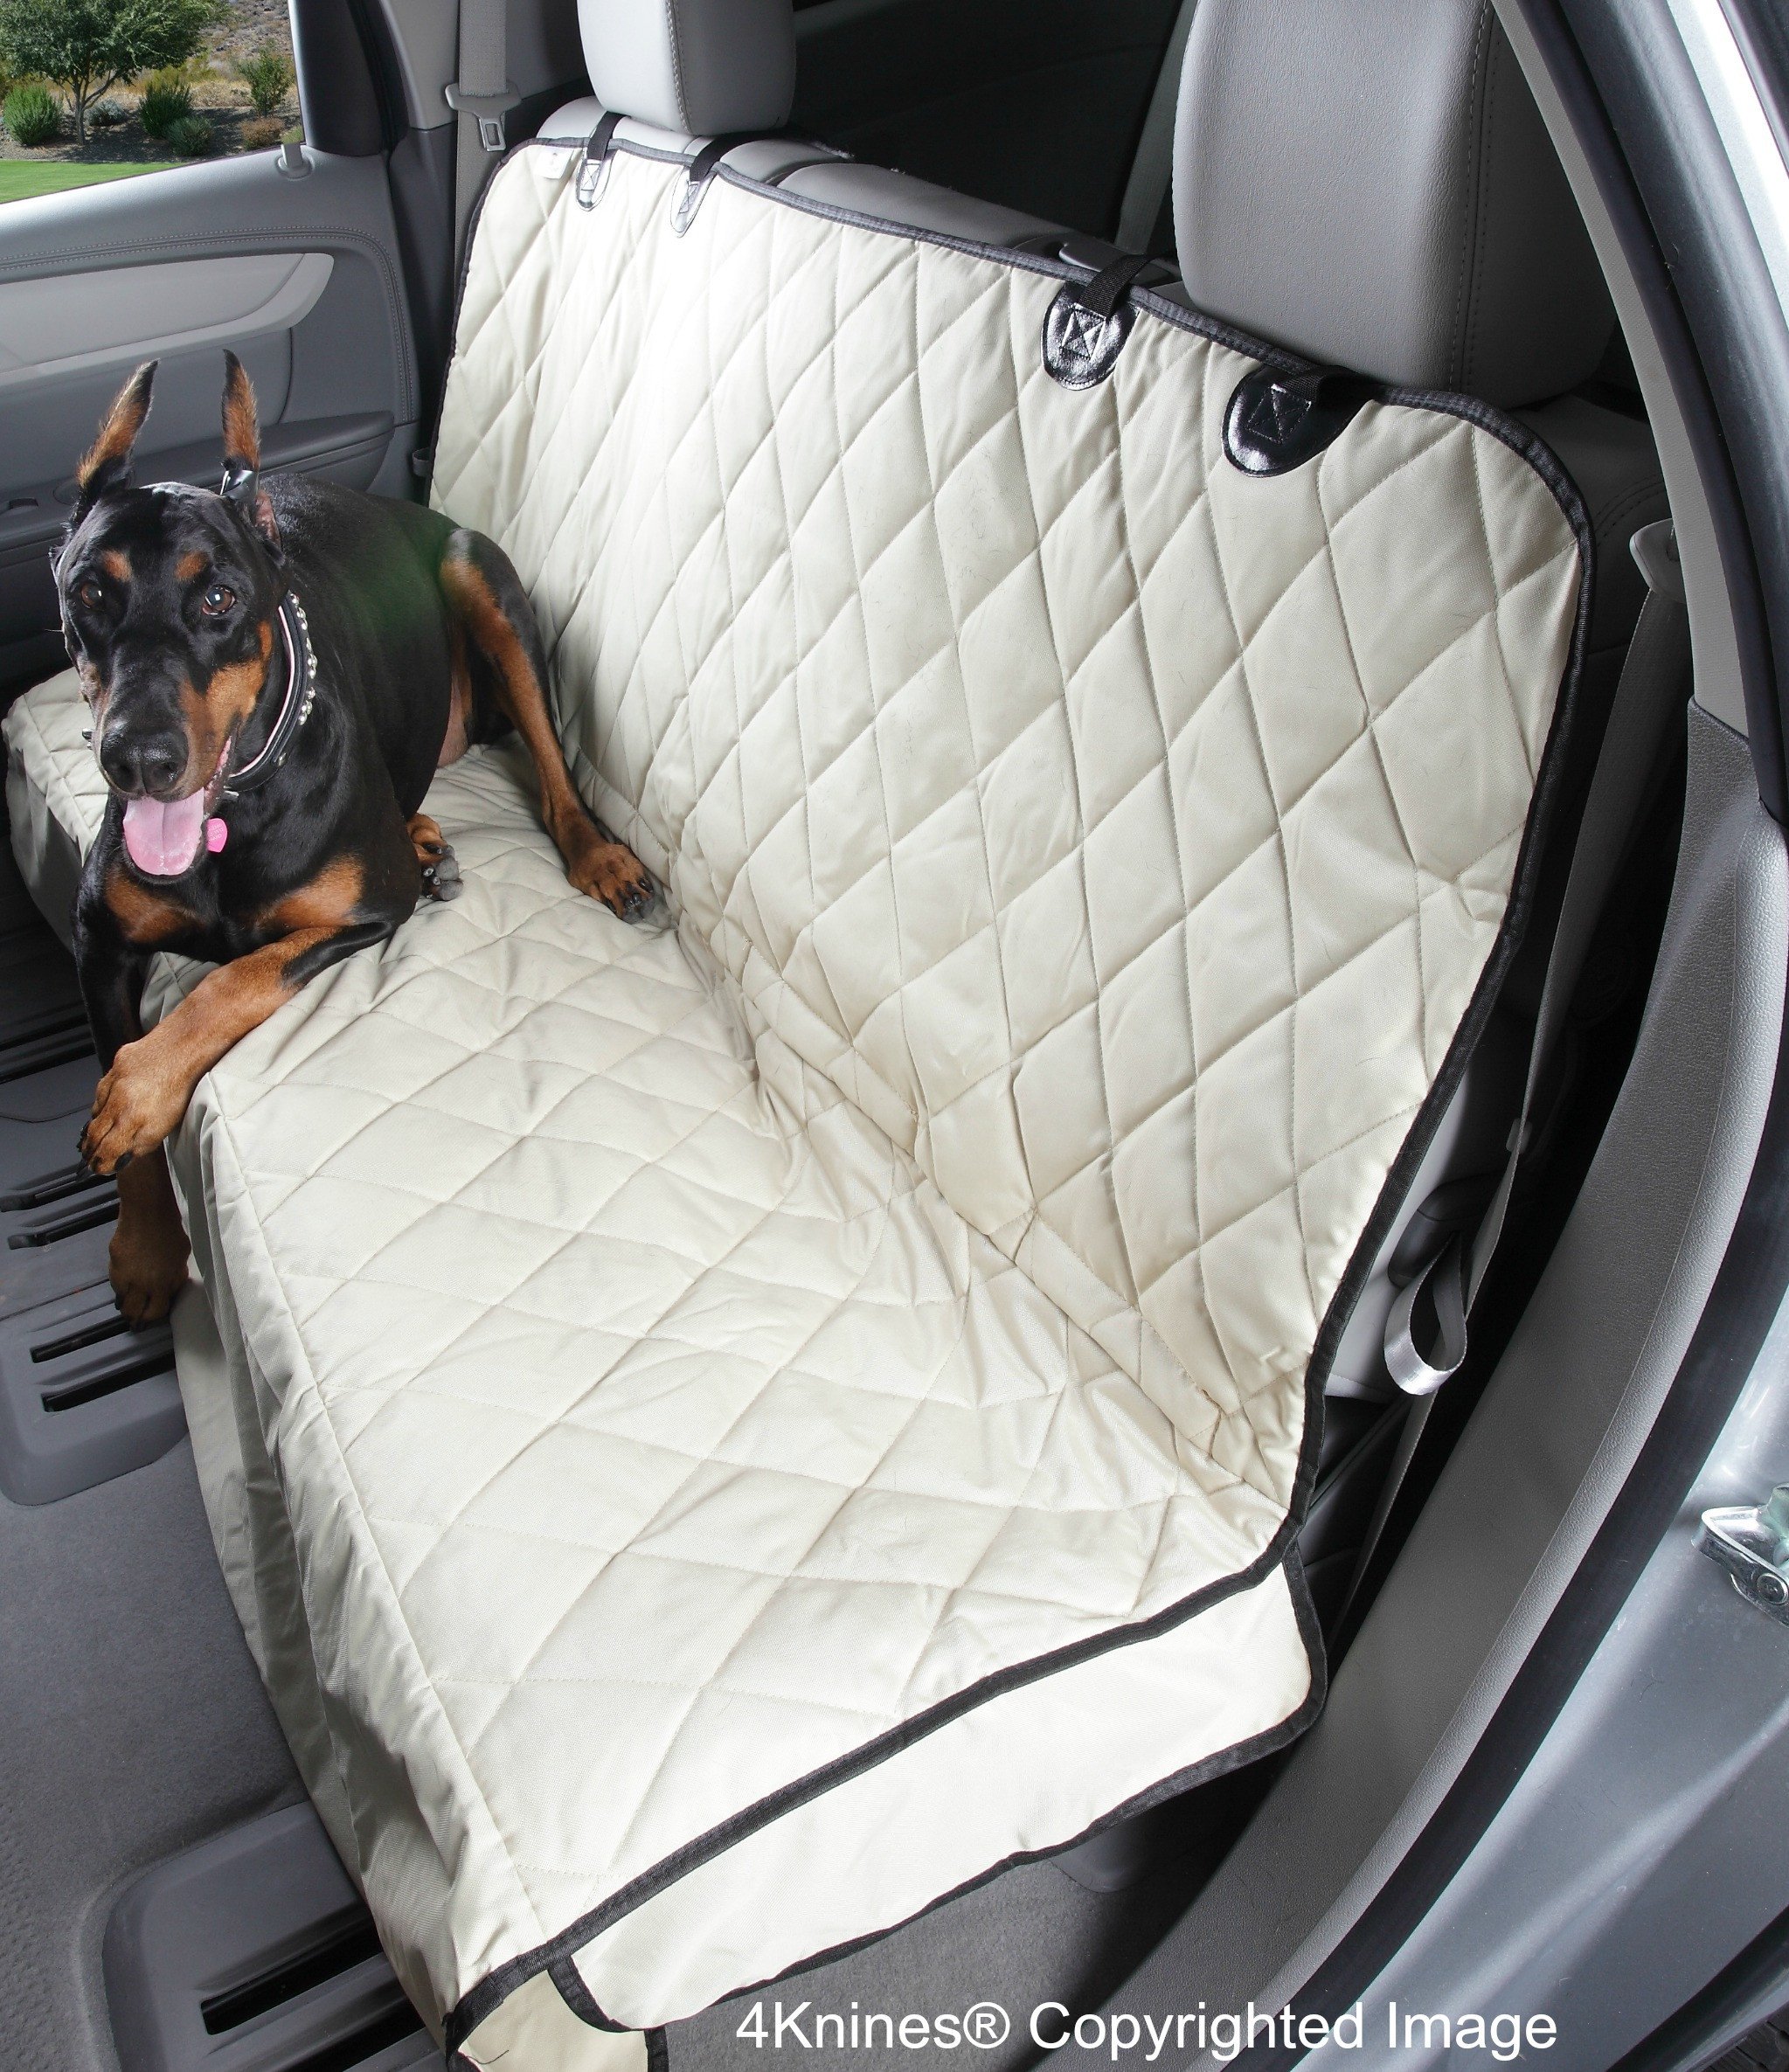 4Knines Dog Seat Cover with Hammock for Cars, Trucks and SUVs USA Based  (Regular, Tan)